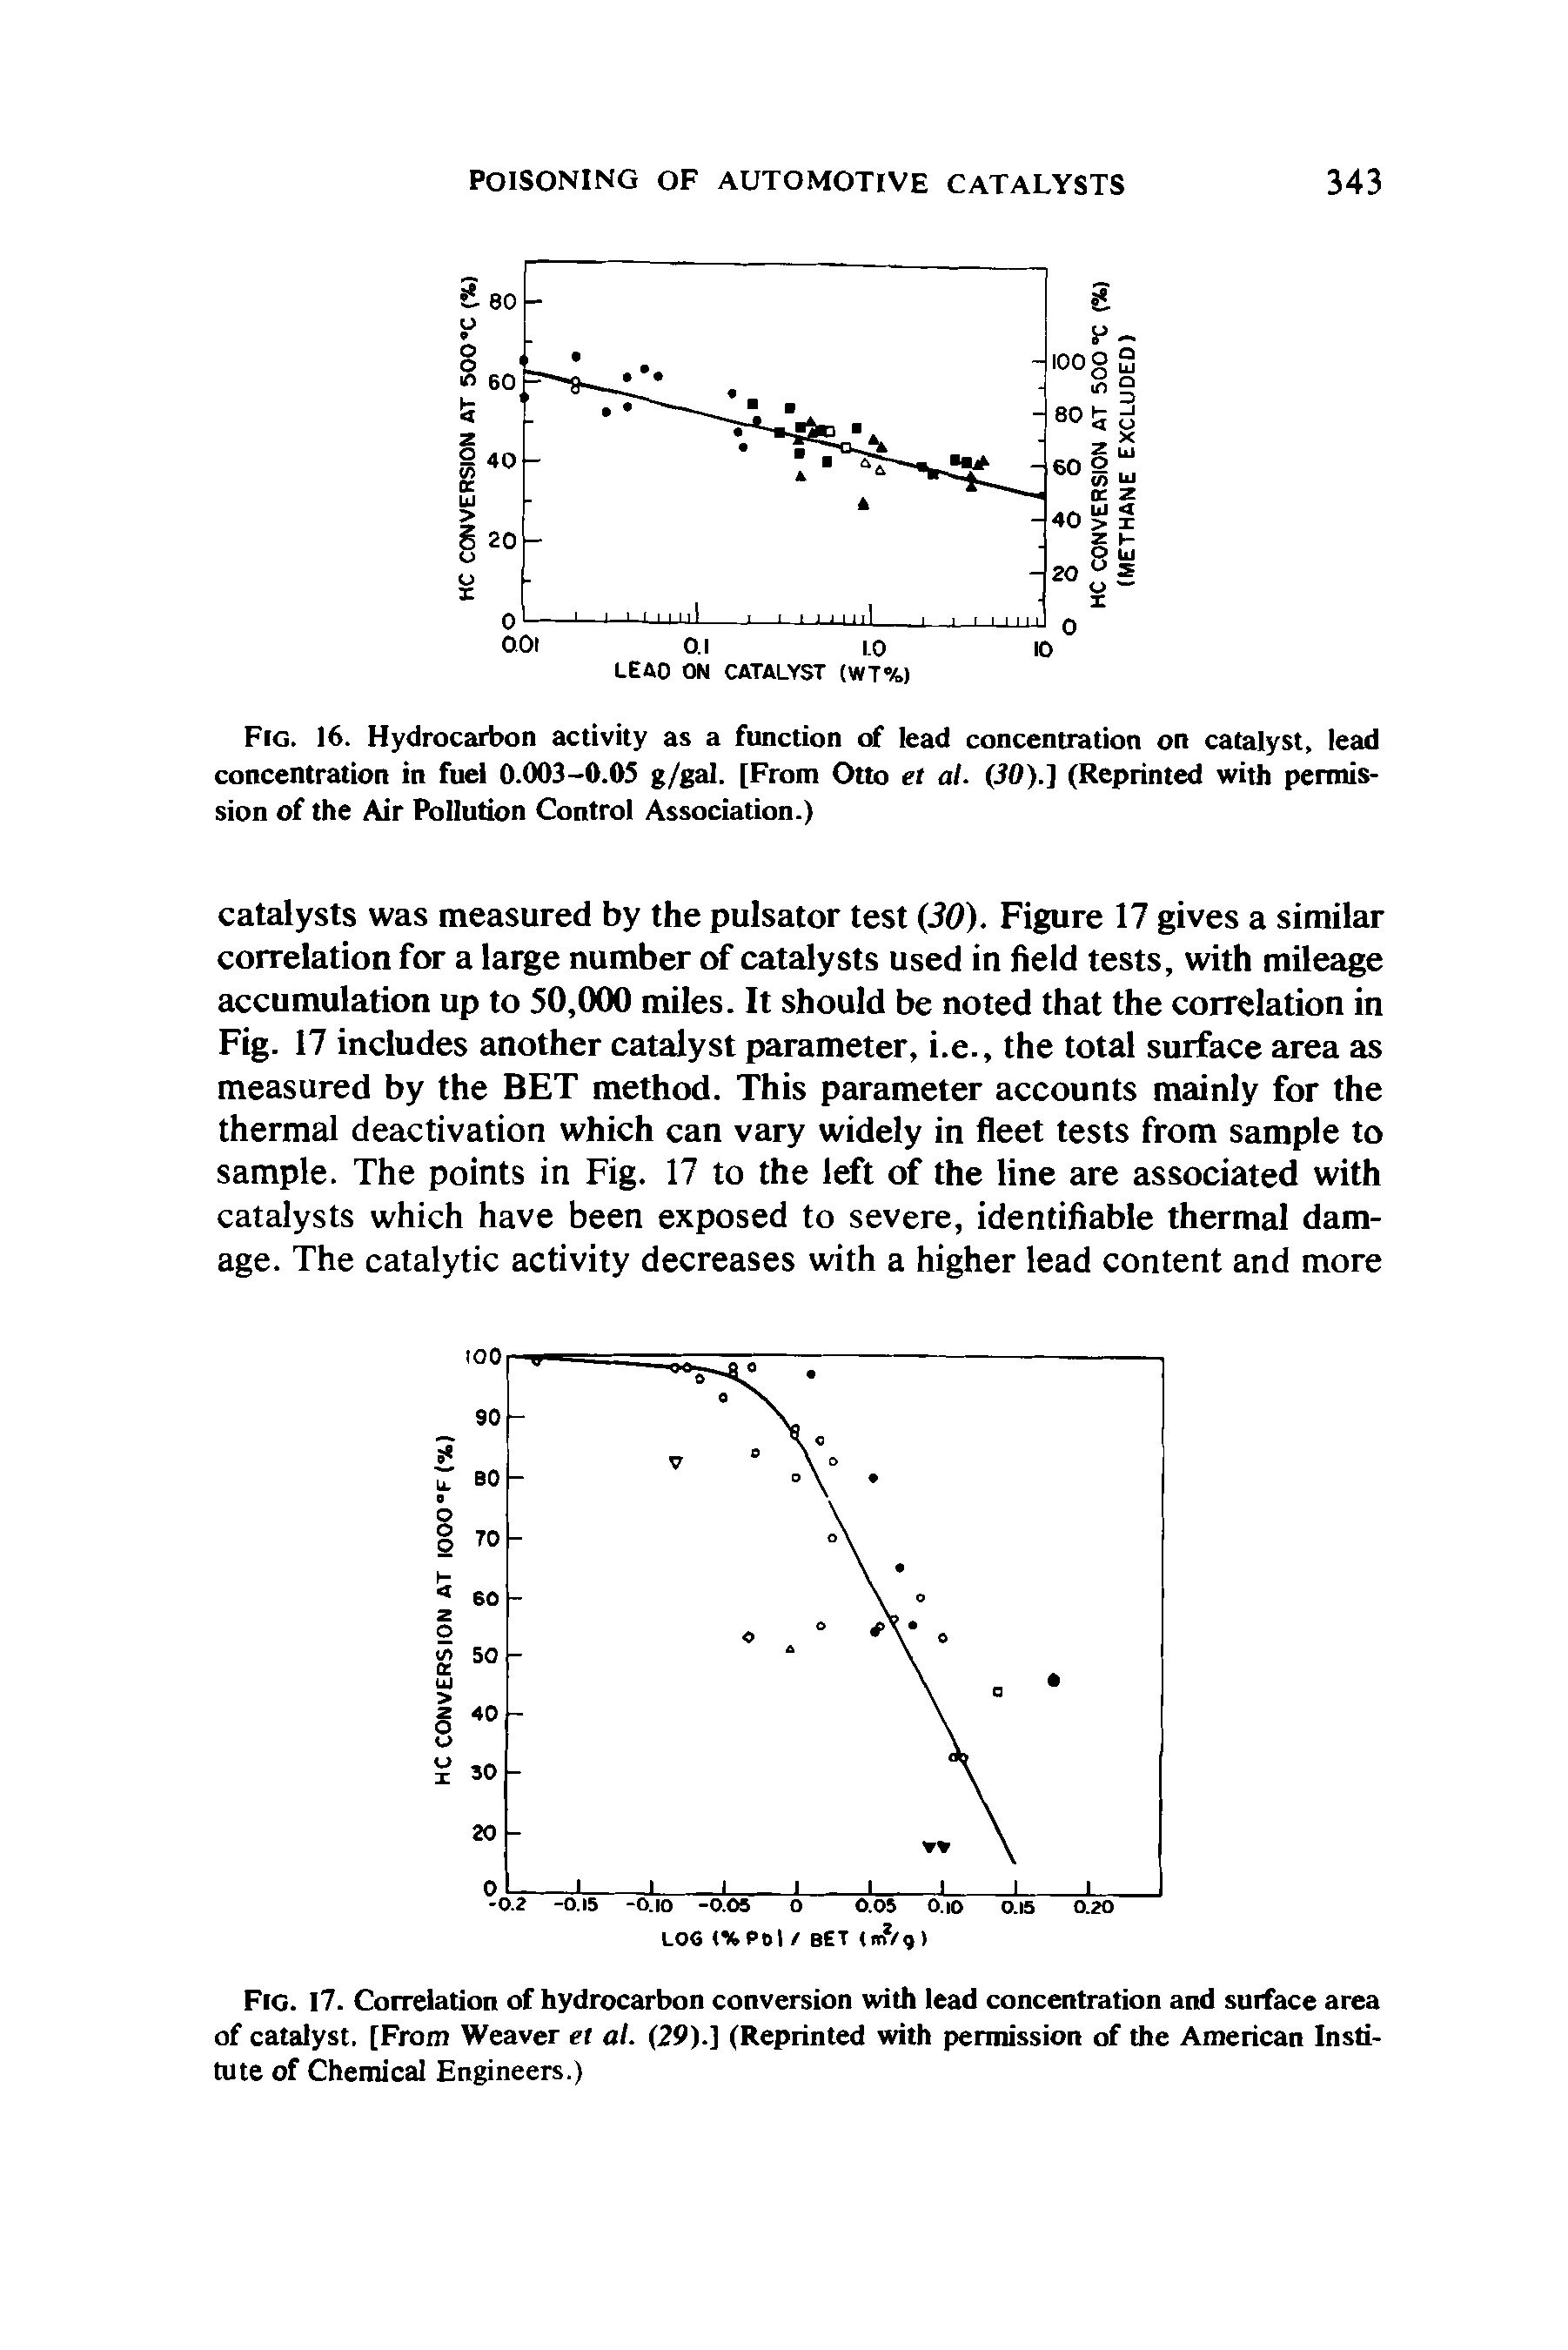 Fig. 17. Correlation of hydrocarbon conversion with lead concentration and surface area of catalyst. [From Weaver et at. (29).] (Reprinted with permission of the American Institute of Chemical Engineers.)...